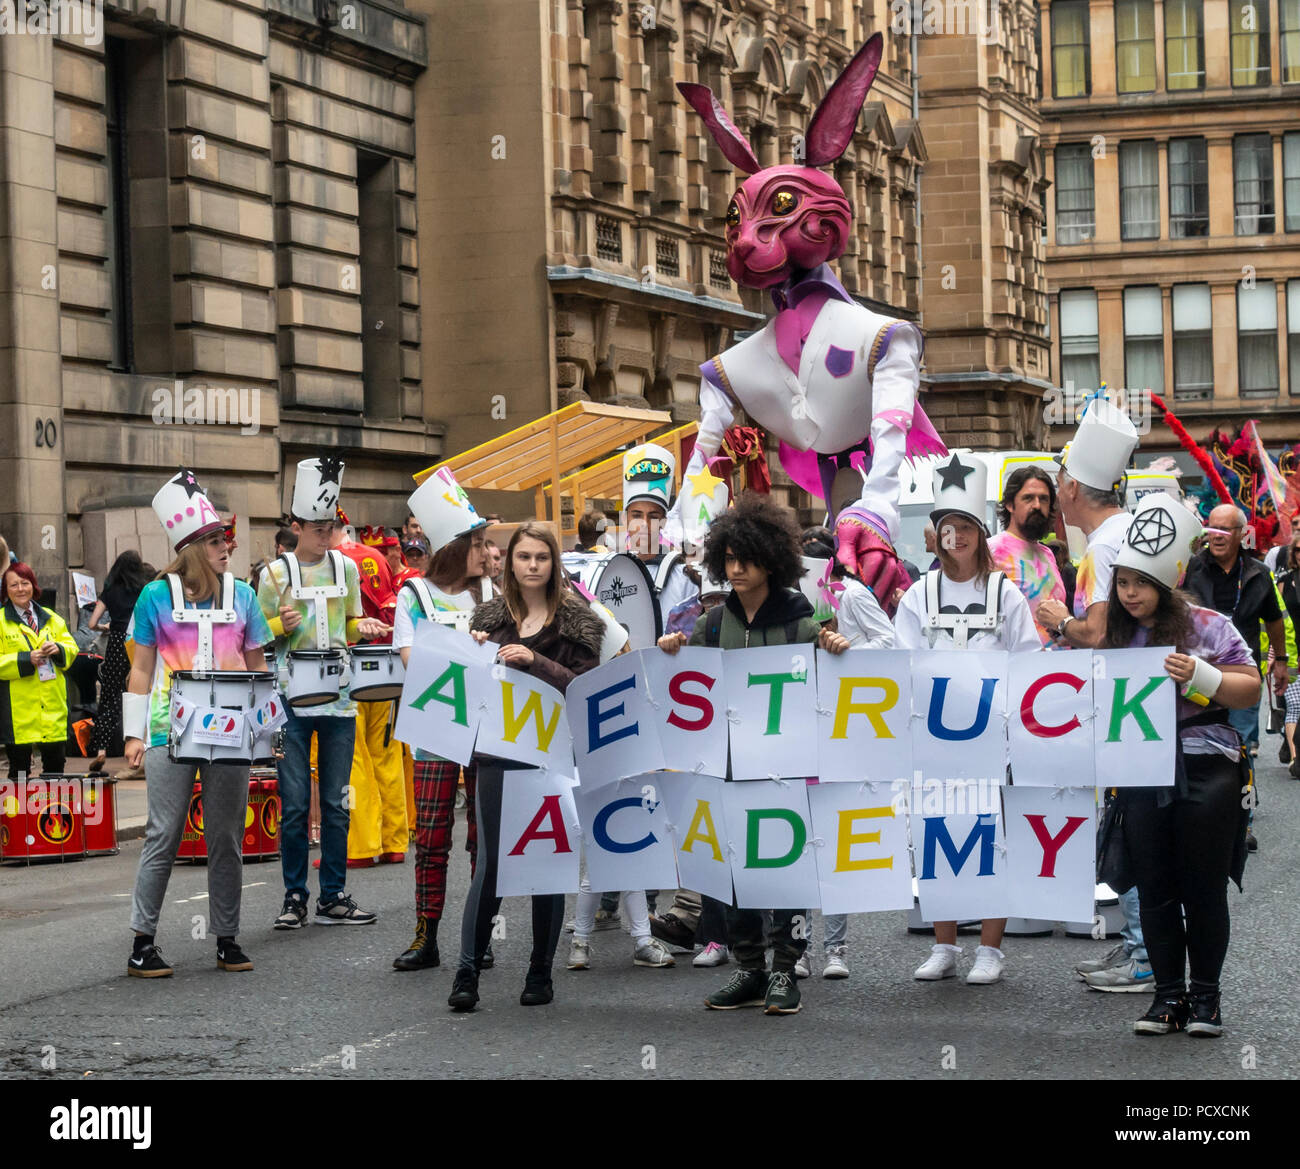 Glasgow, Scotland, UK. 04th August 2018. Young people from Awestruck Academy, a Creative Arts Centre in Clydebank, waiting for the start of the Carnival Procession of the Merchant City Festival. The festival is part of Festival 2018 a city-wide cultural event running in parallel with Glasgow 2018, the European Championships. Credit: Elizabeth Leyden/Alamy Live News Stock Photo